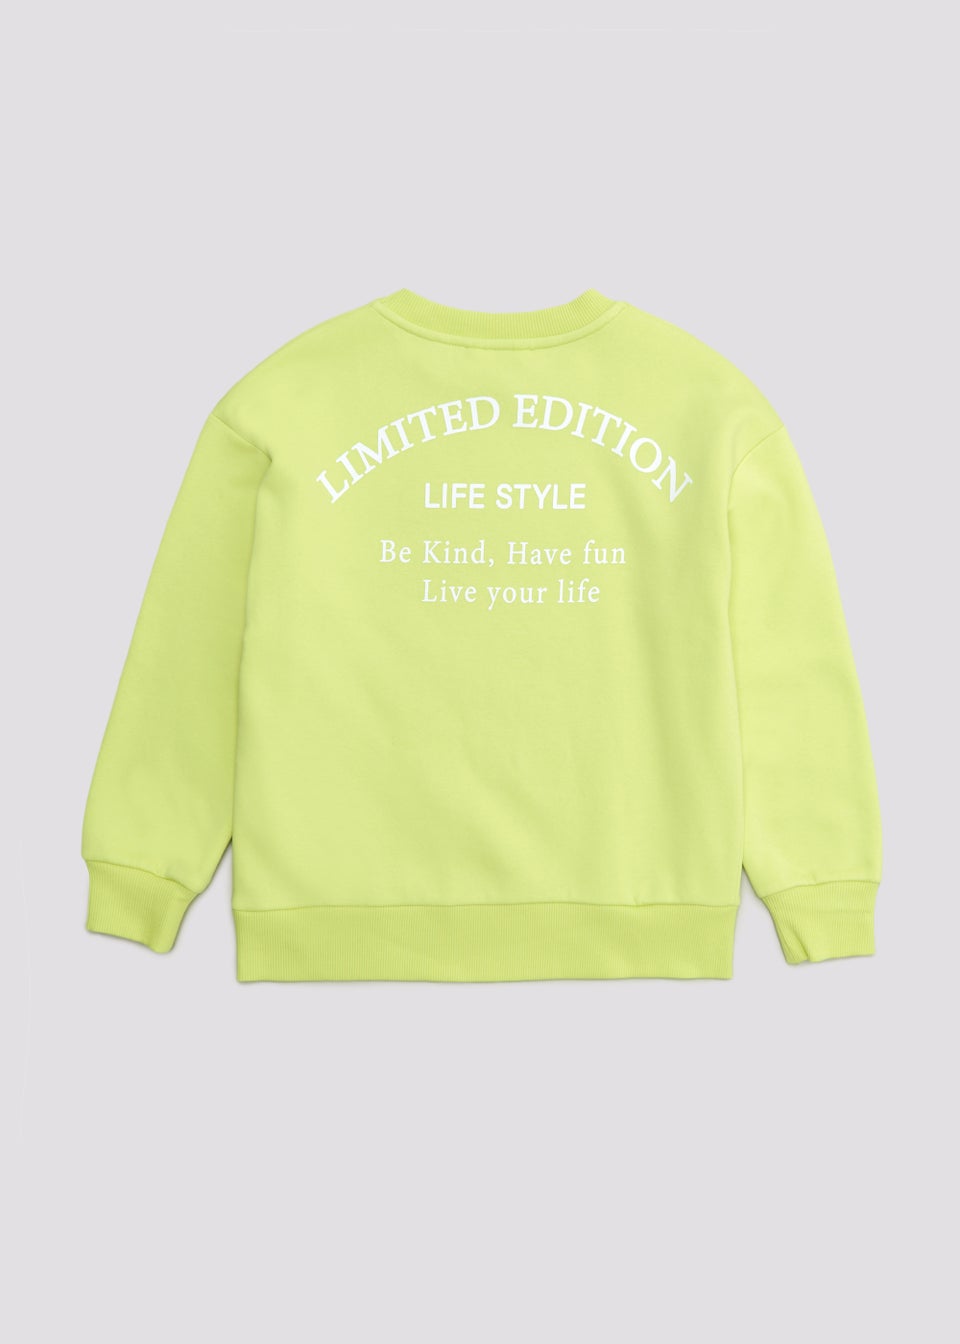 Girls Candy Couture Lime Slogan Sweatshirt (9-16yrs)